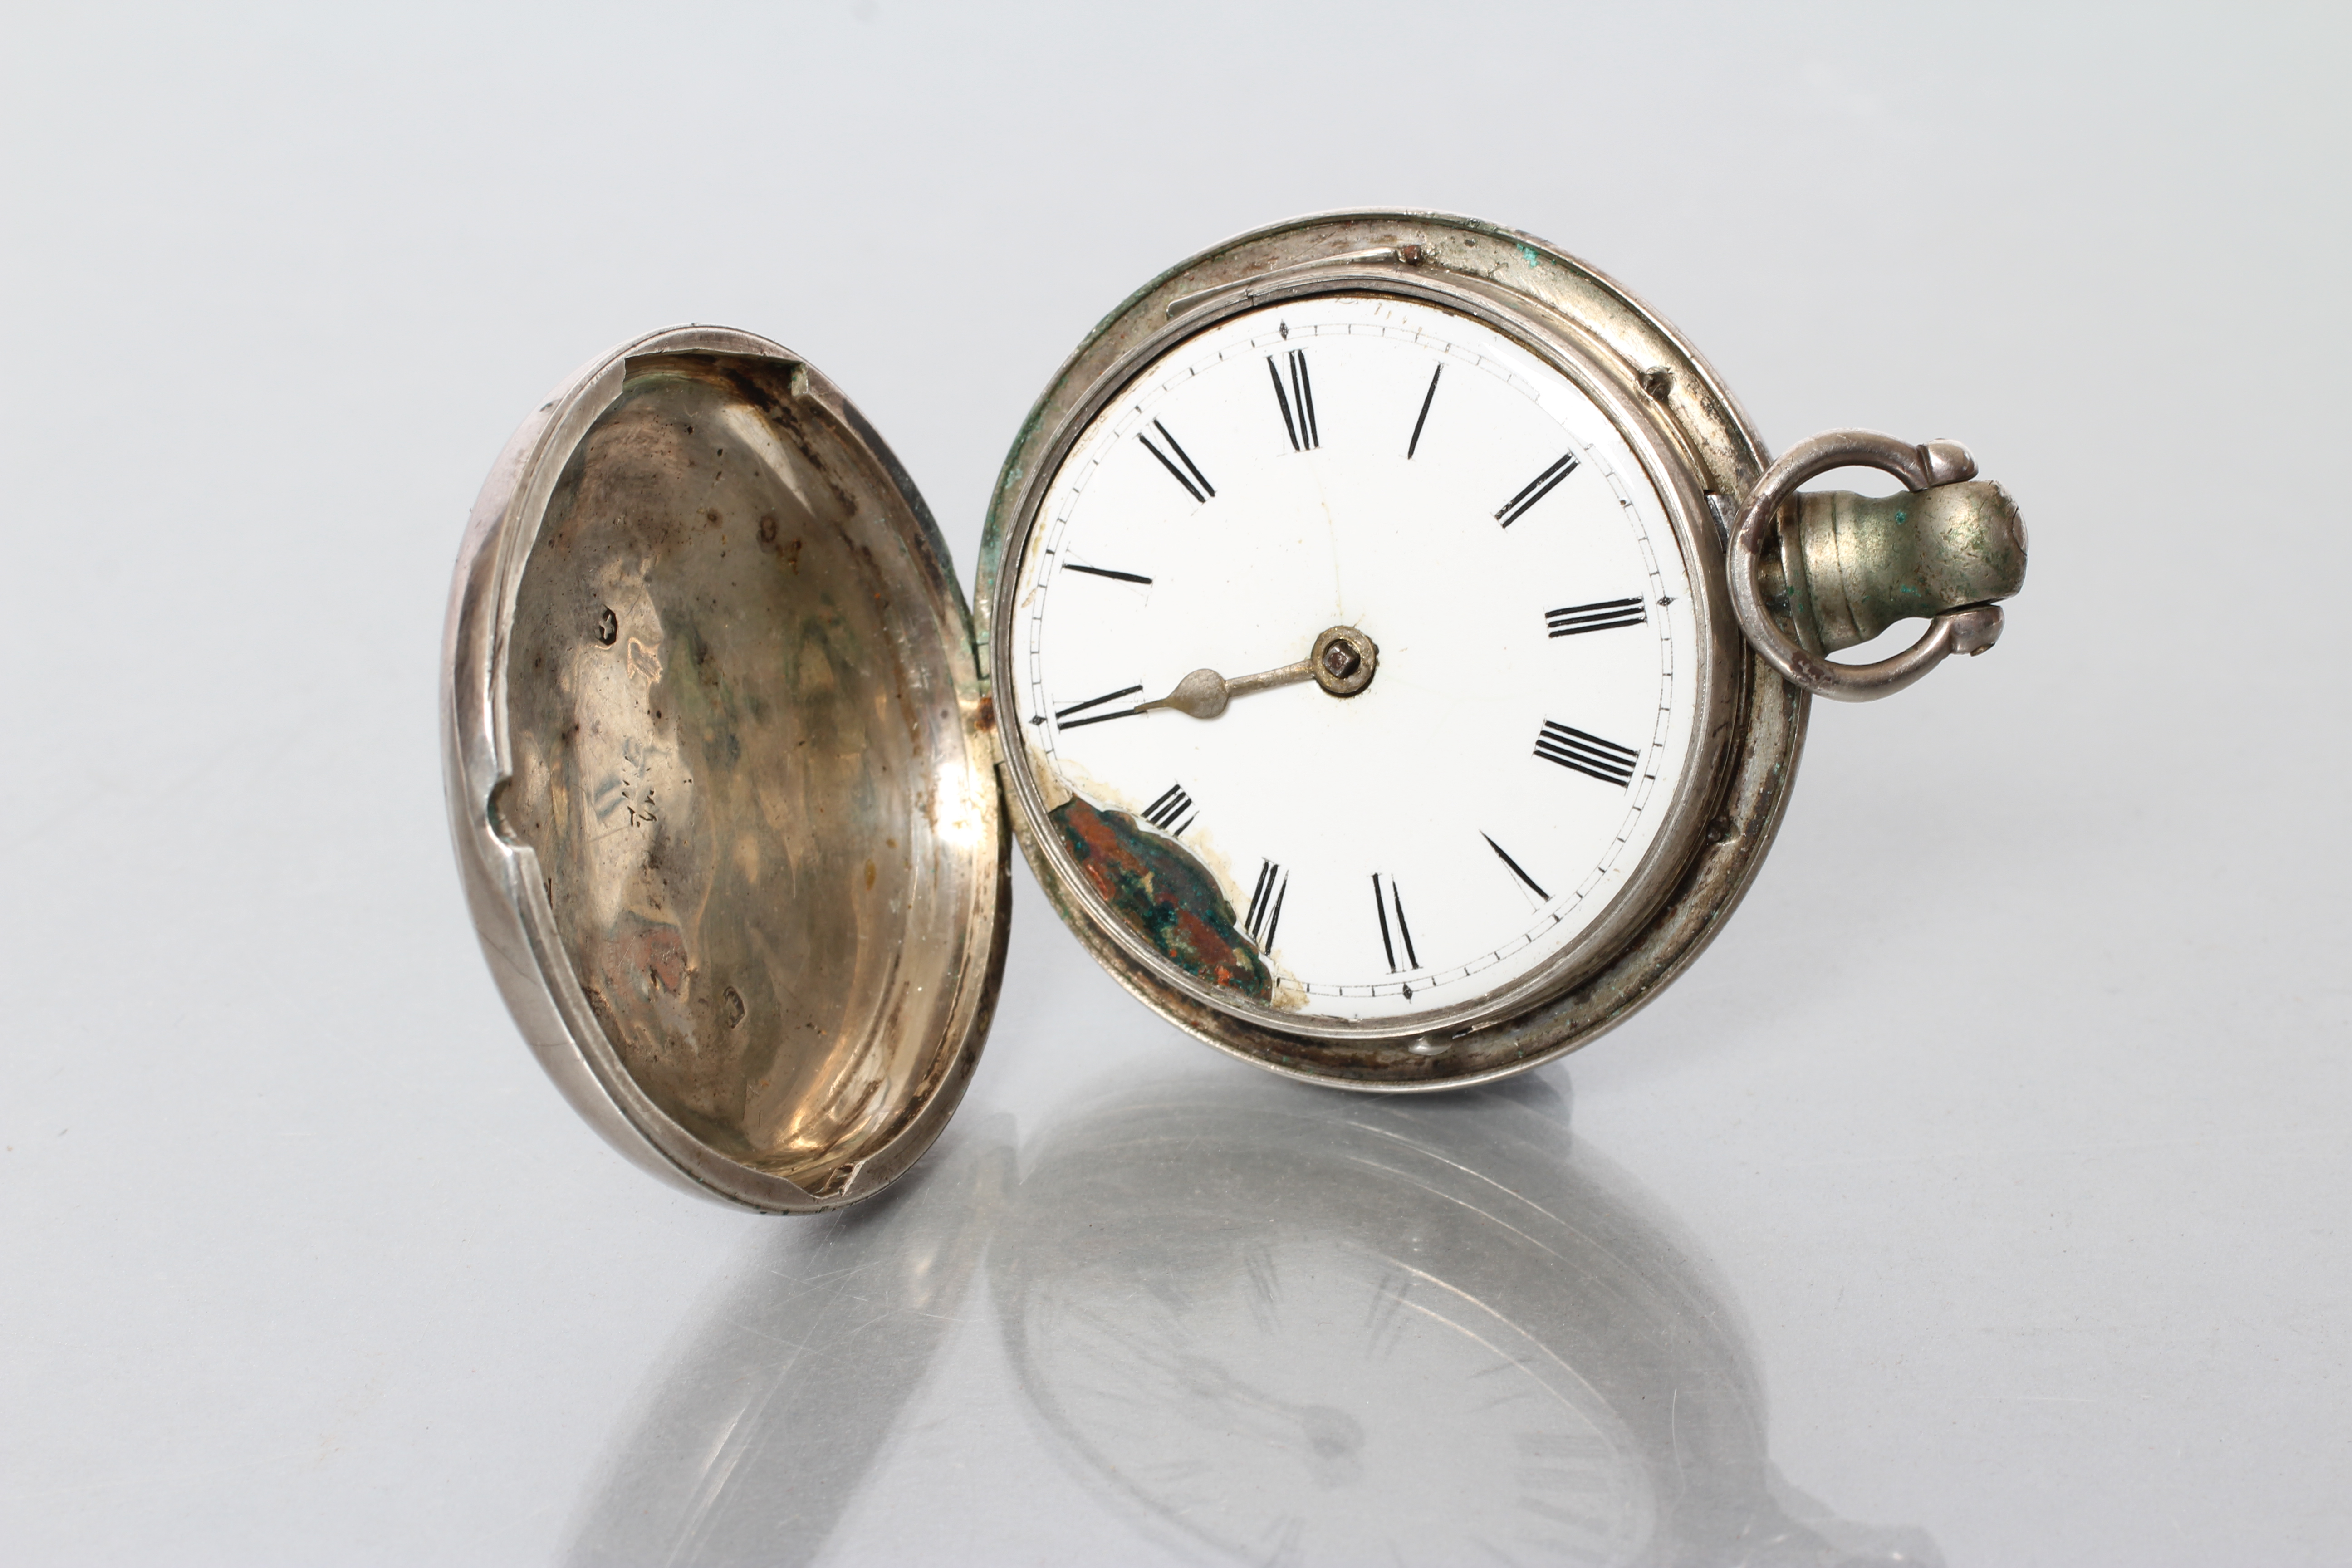 A LATE GEORGE III SILVER POCKET WATCH, the white enamel dial with black Roman numerals, the verge